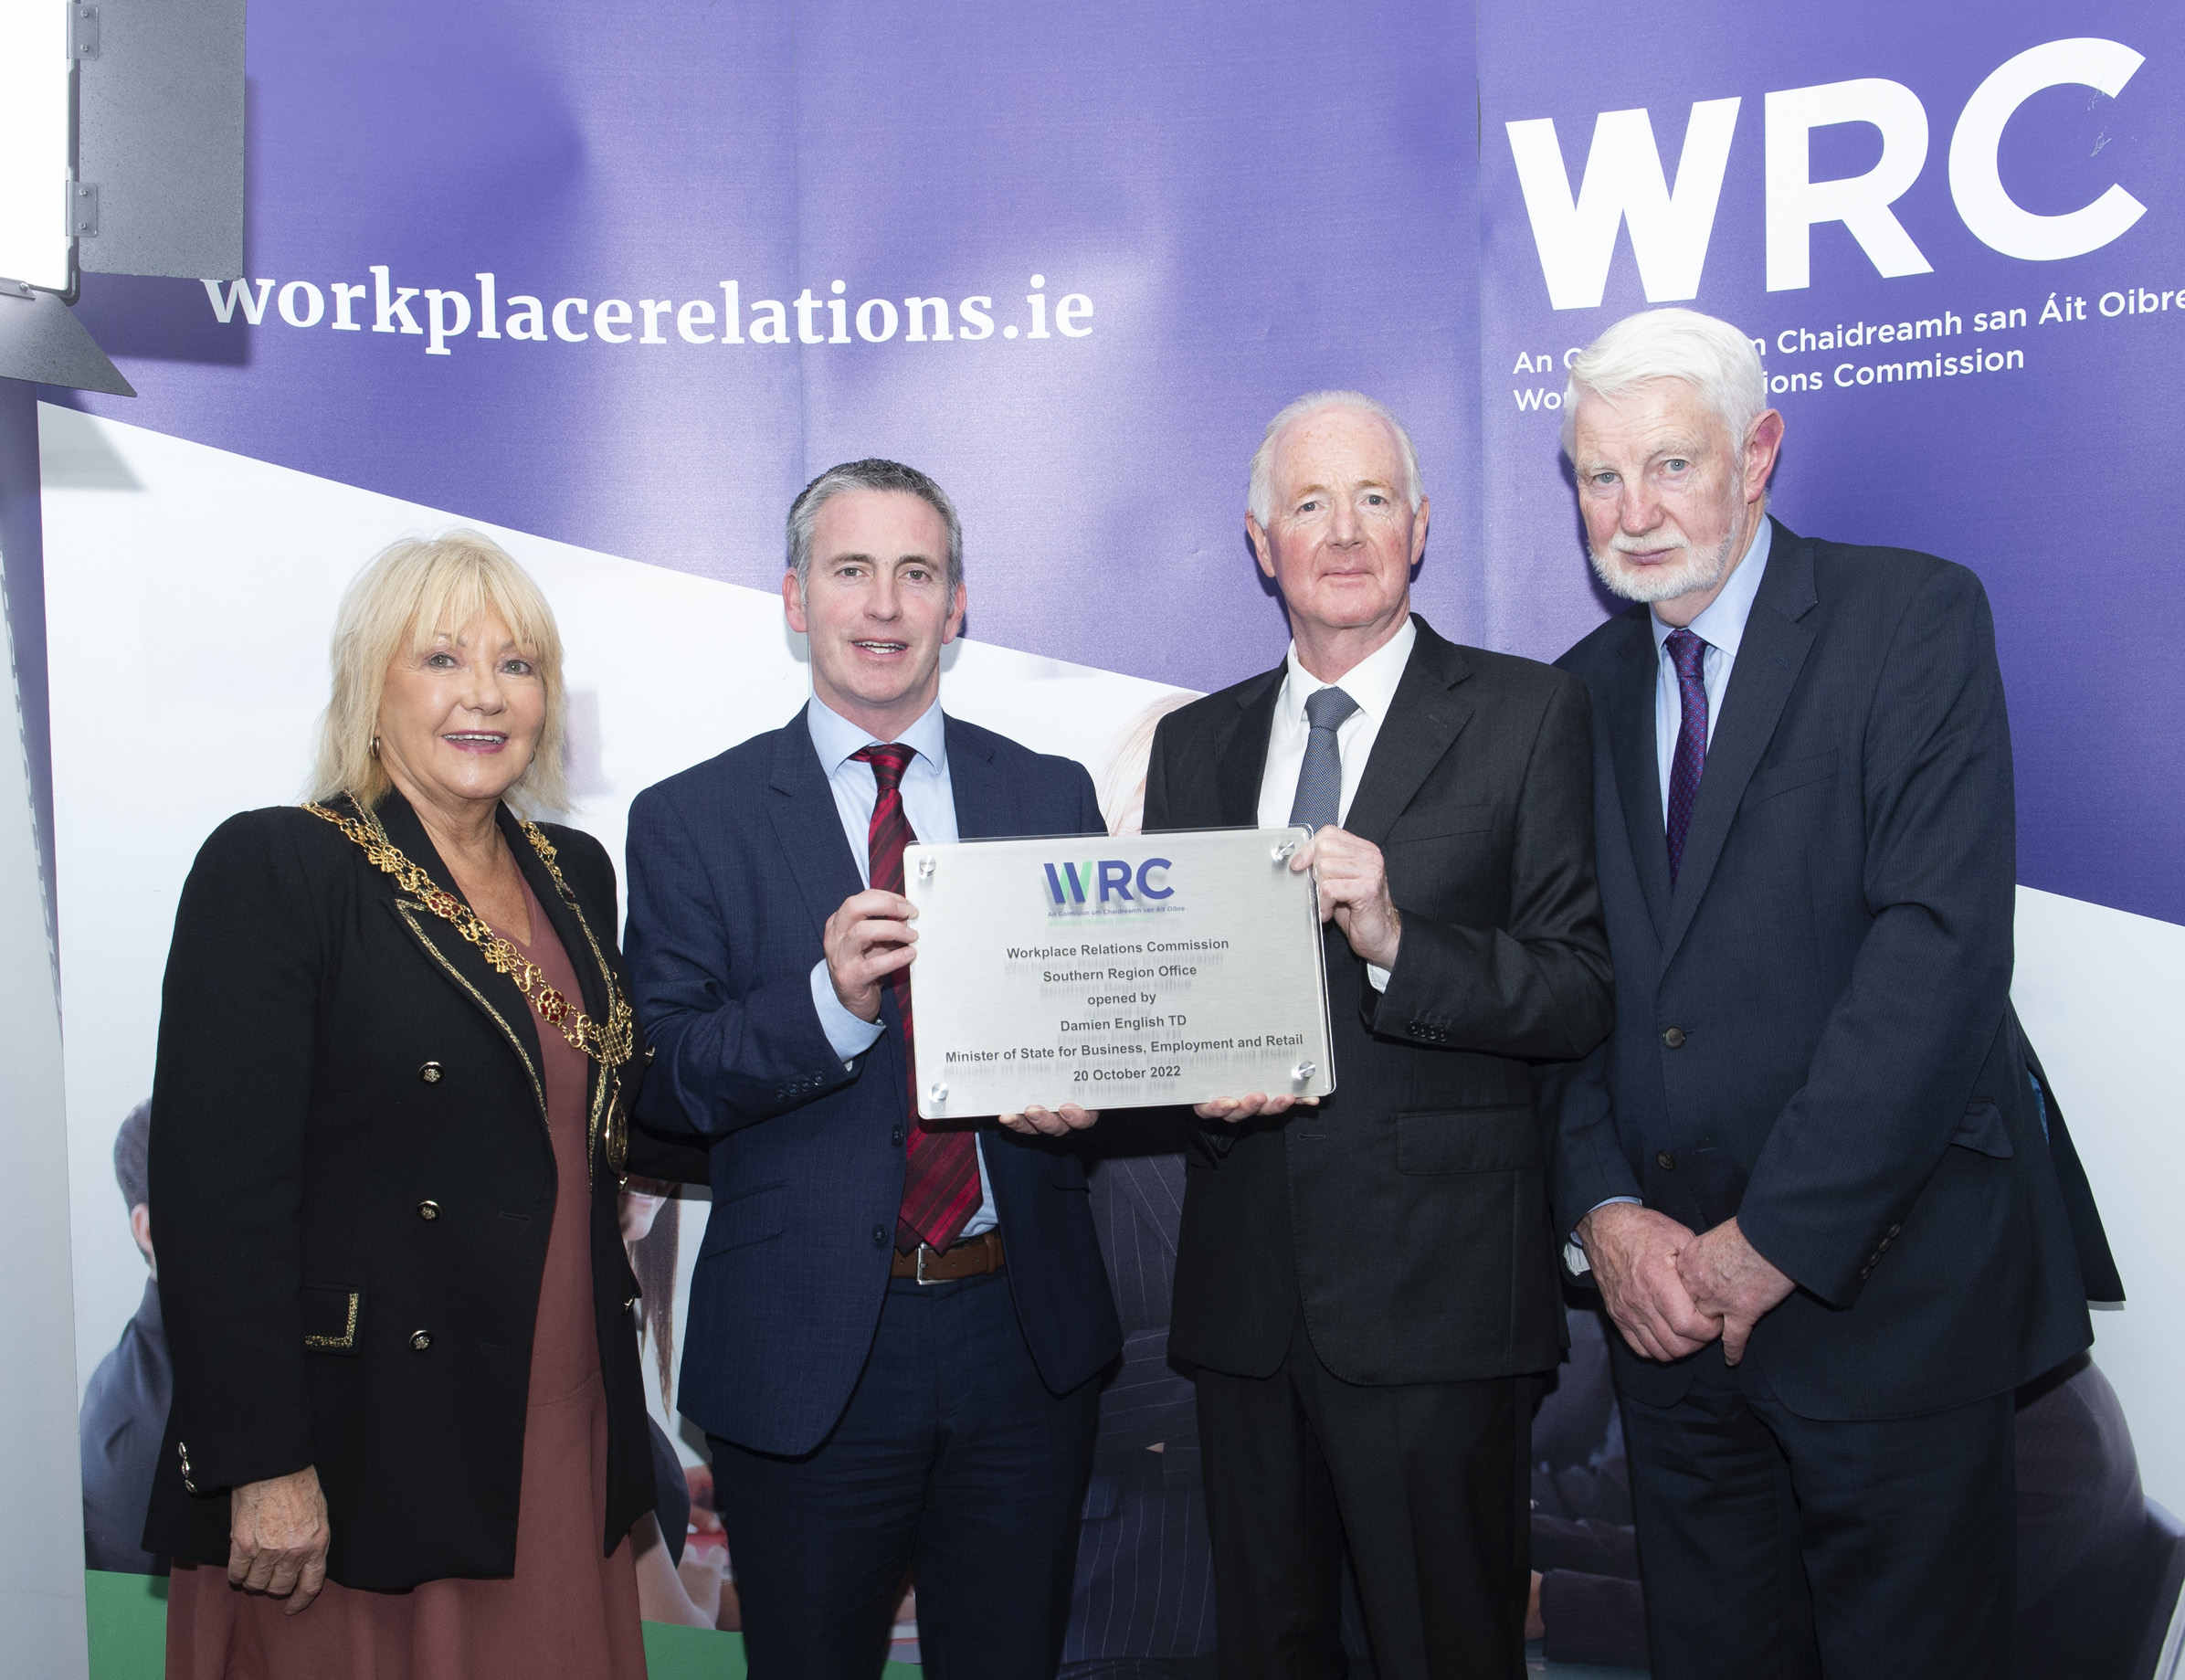 An image of 4 persons holding the plaque to commemorate the opening of the WRC Cork office